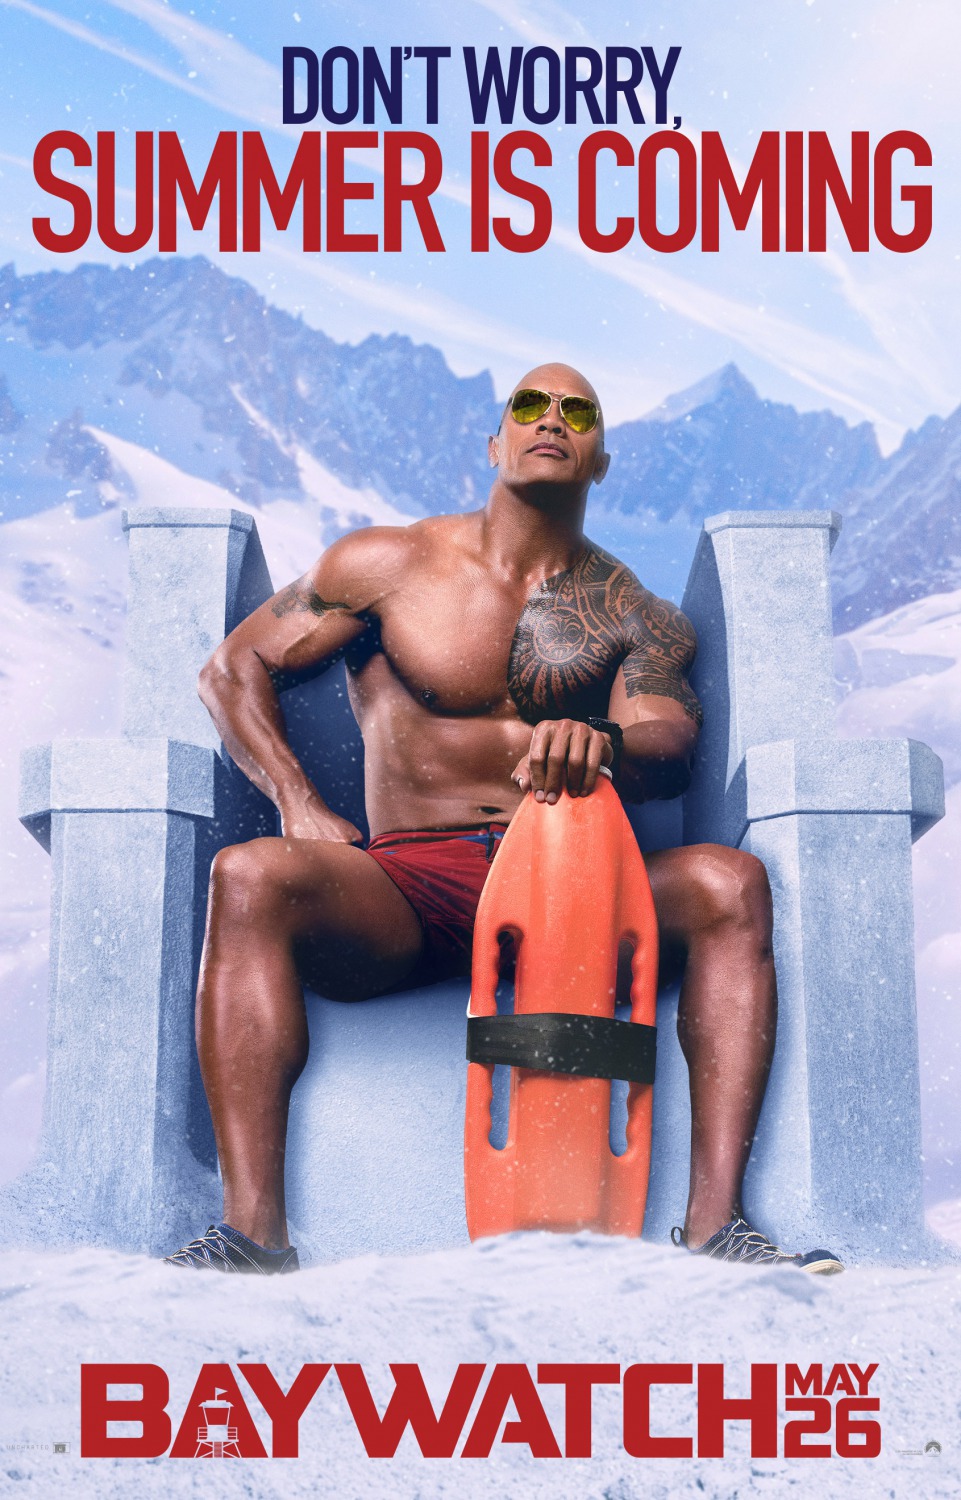 Extra Large Movie Poster Image for Baywatch (#10 of 17)